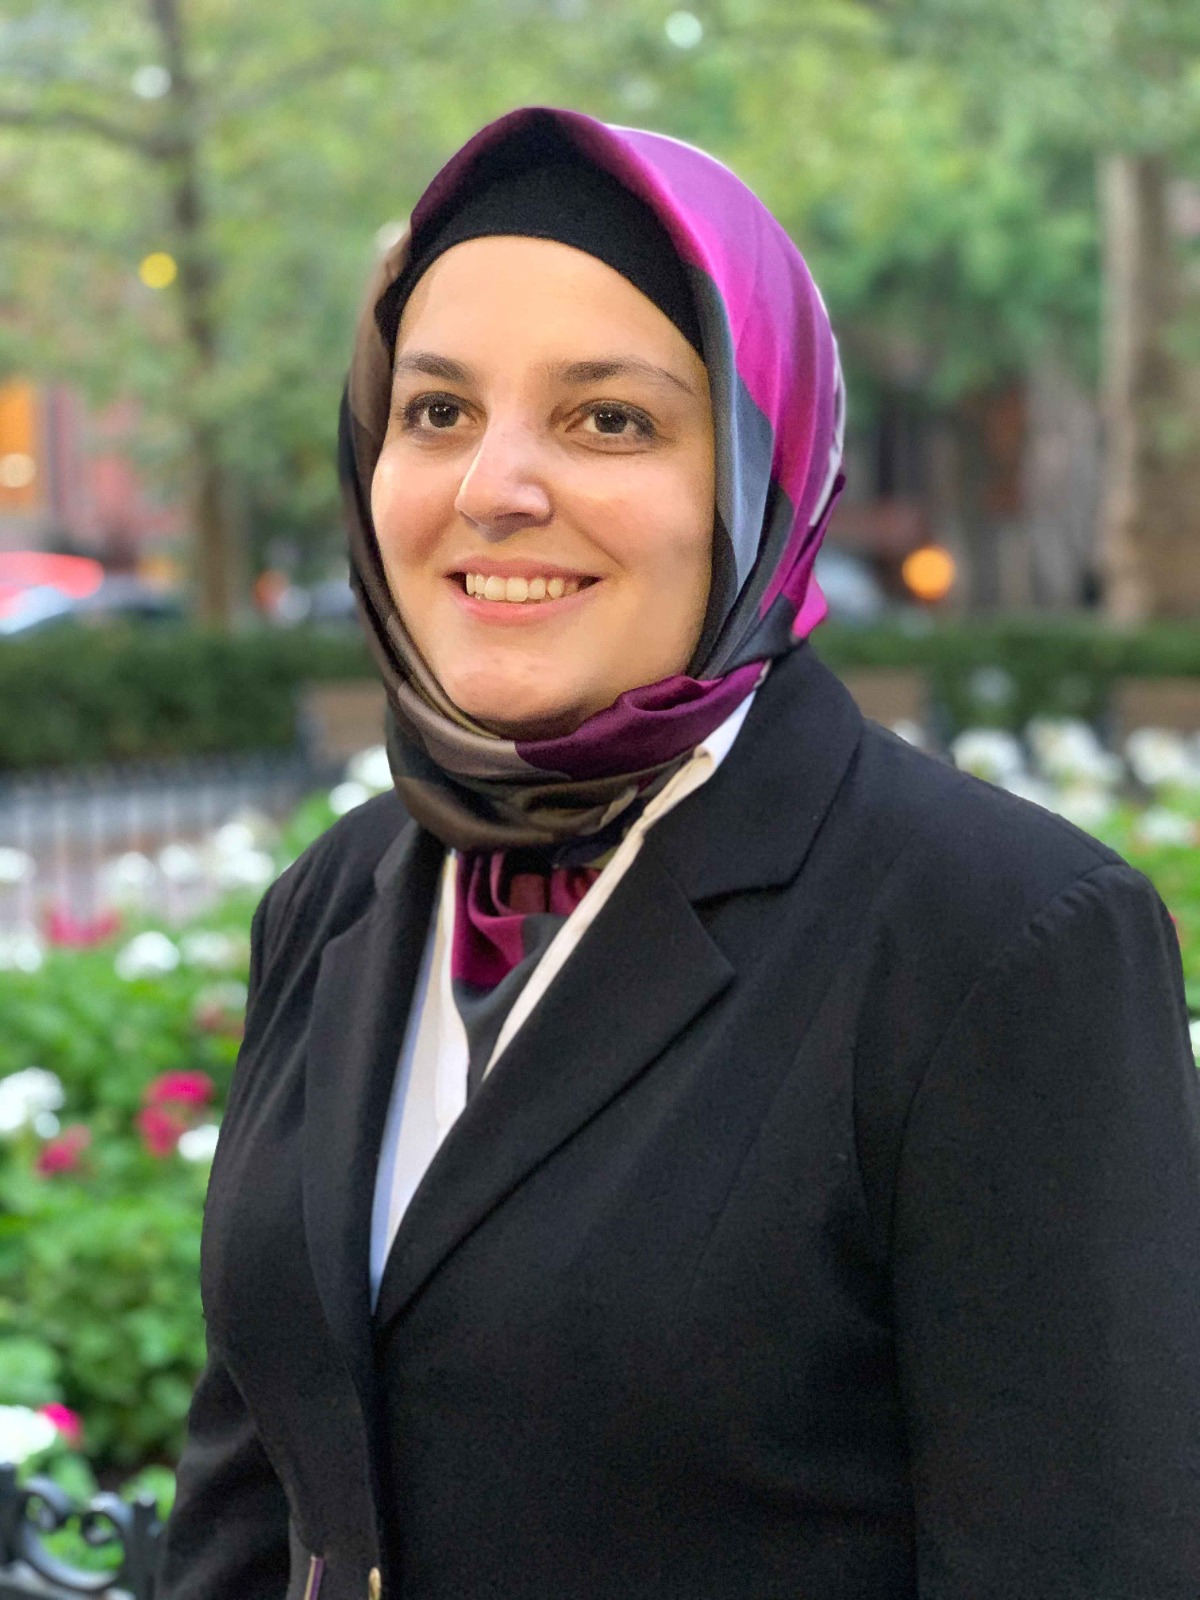 Mona Minkara, a Lebanese woman with light brown skin, wearing a purple hijab and black suit. Behind her are trees and flowers.